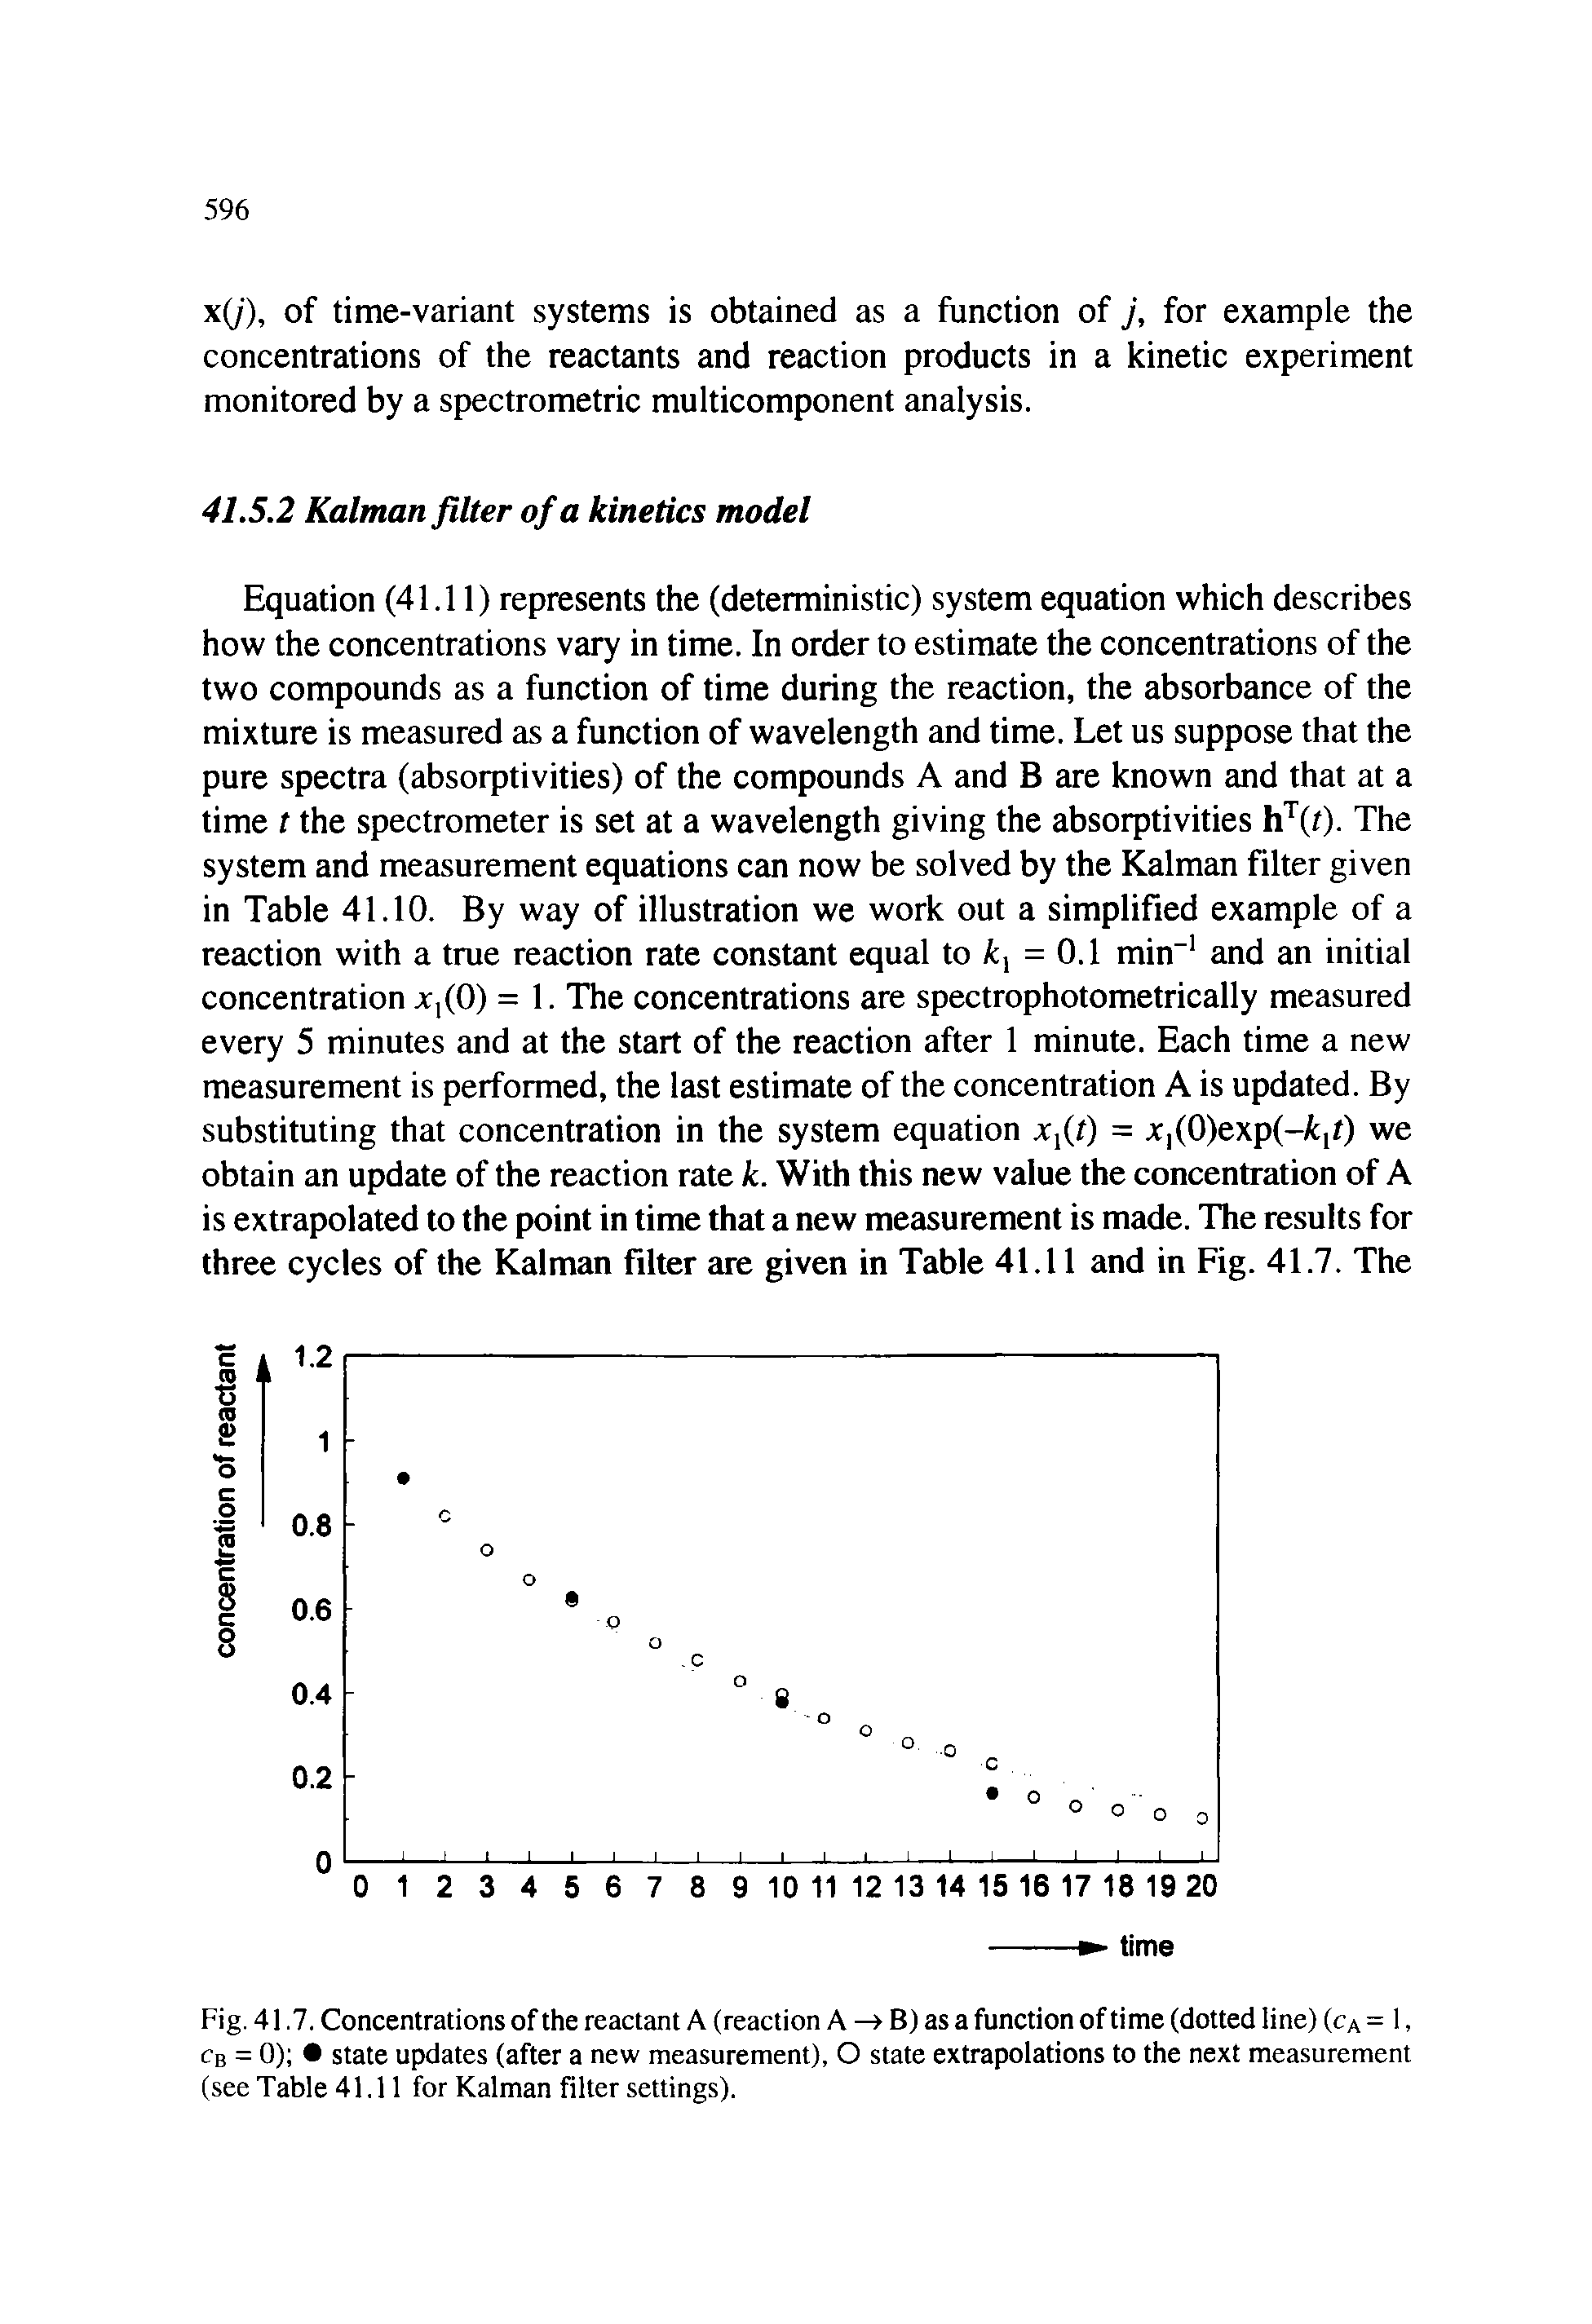 Fig. 41.7. Concentrations of the reactant A (reaction A B) as a function of time (dotted line) (ca = 1, cb = 0) state updates (after a new measurement), O state extrapolations to the next measurement (see Table 41.11 for Kalman filter settings).